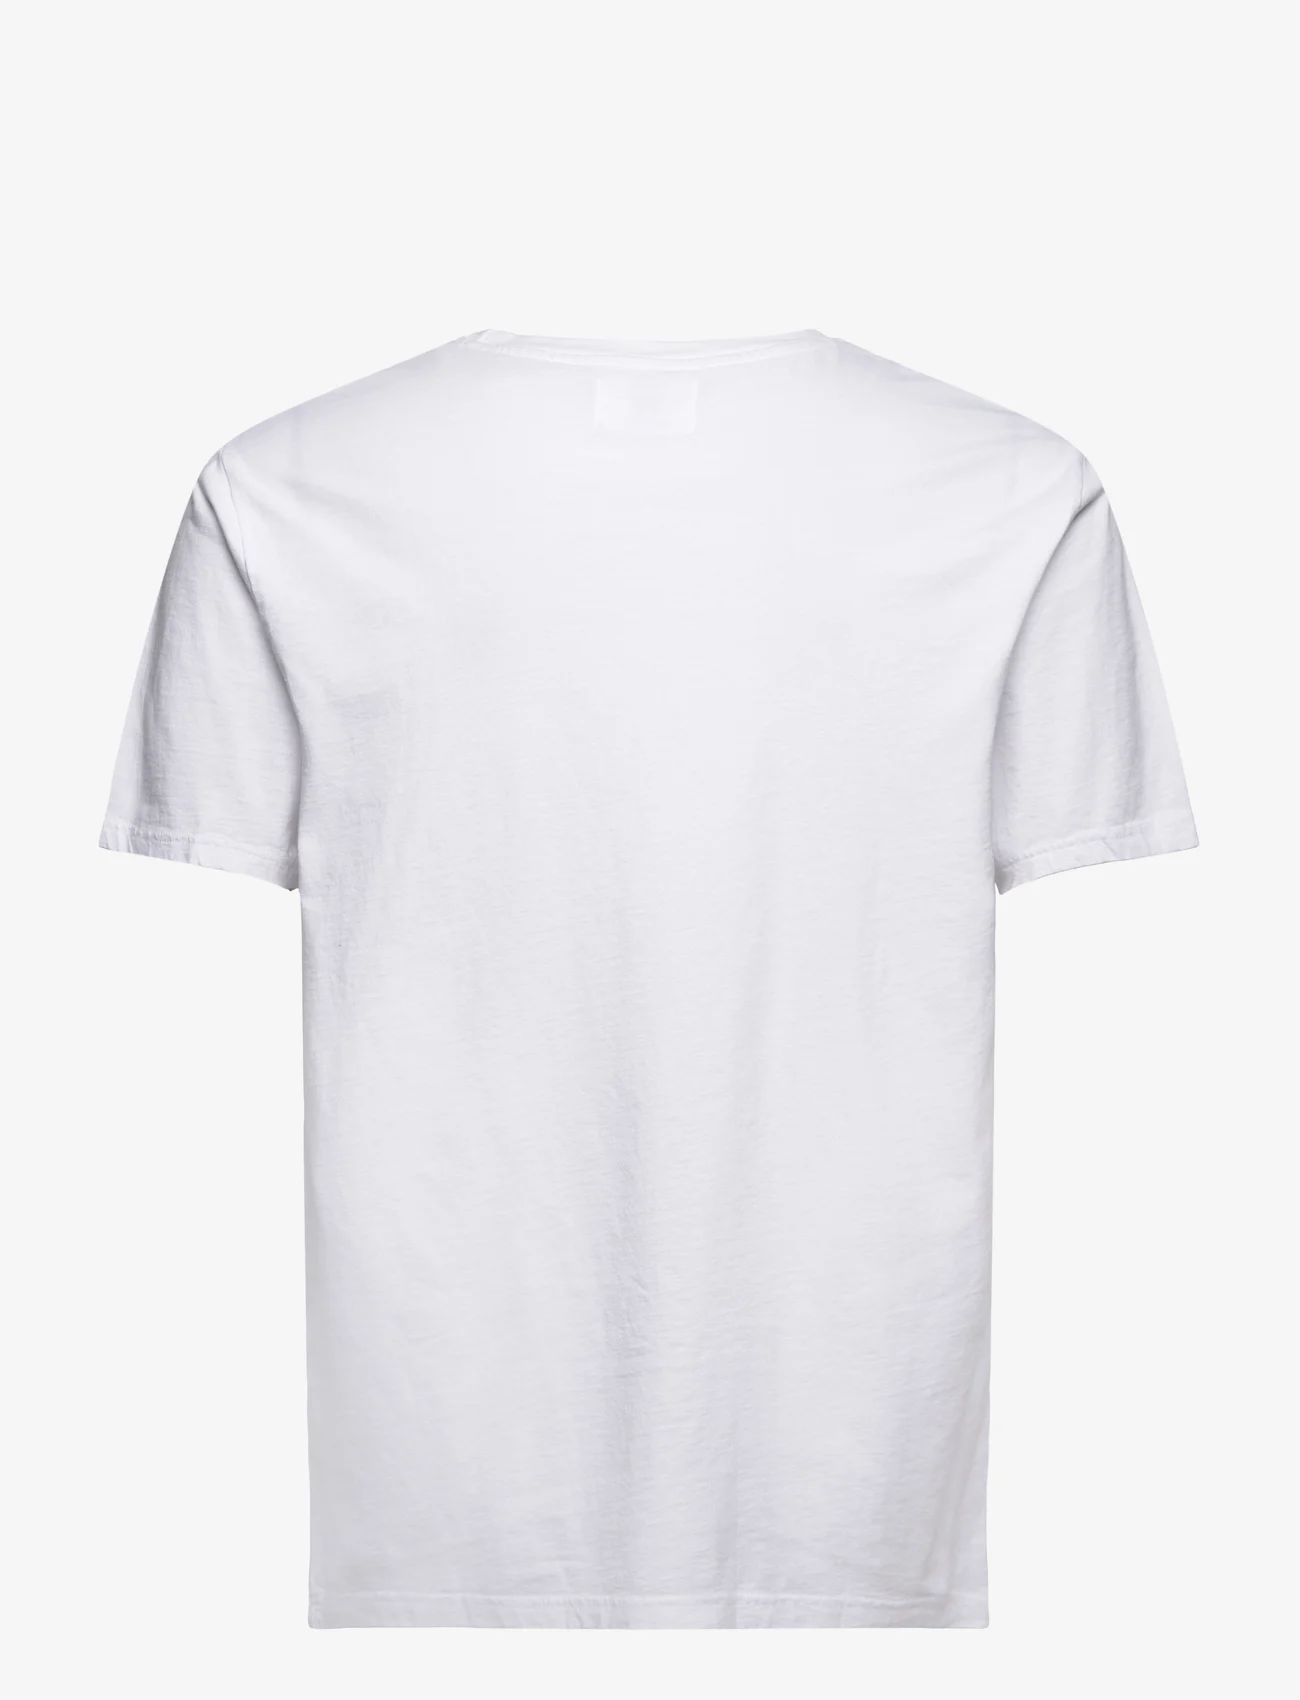 Double A by Wood Wood - Ace T-shirt - basic t-shirts - white/white - 1